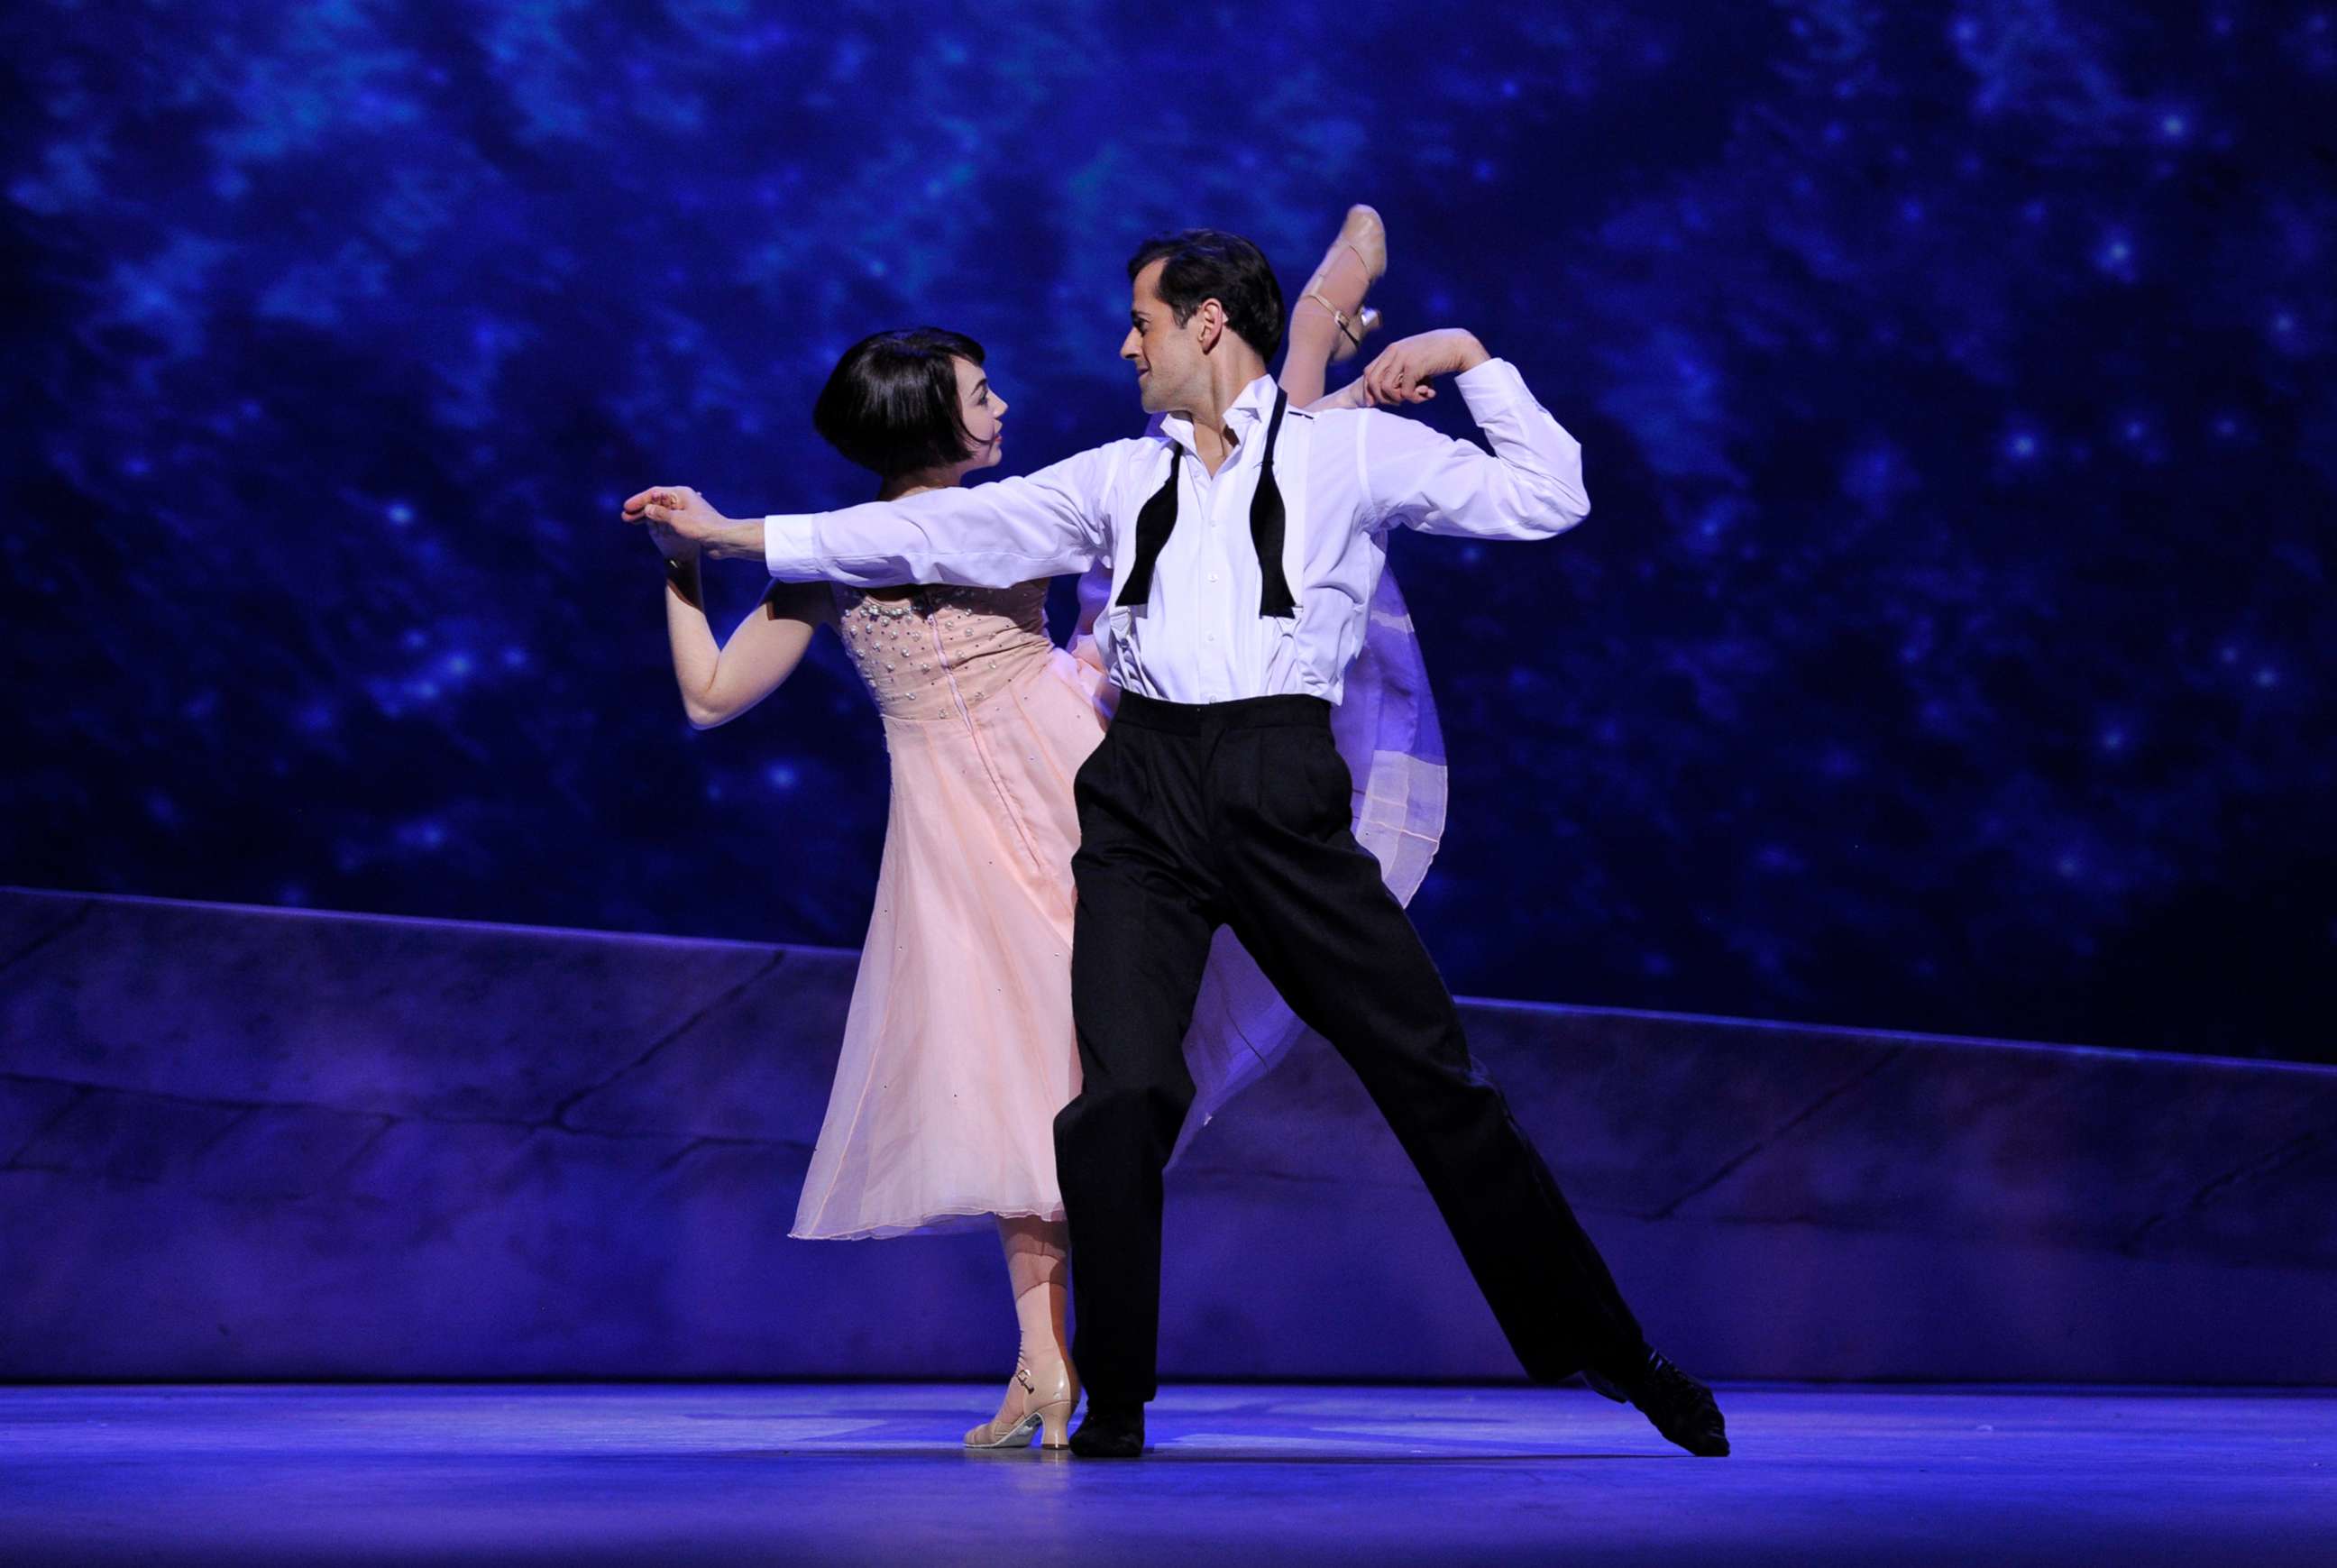 PHOTO: Robert Fairchild as Jerry Mulligan and Leanne Cope as Lise Dassin in An American in Paris choreographed and directed by Christopher Wheeldon at The Dominion Theatre on March 14, 2017 in London.